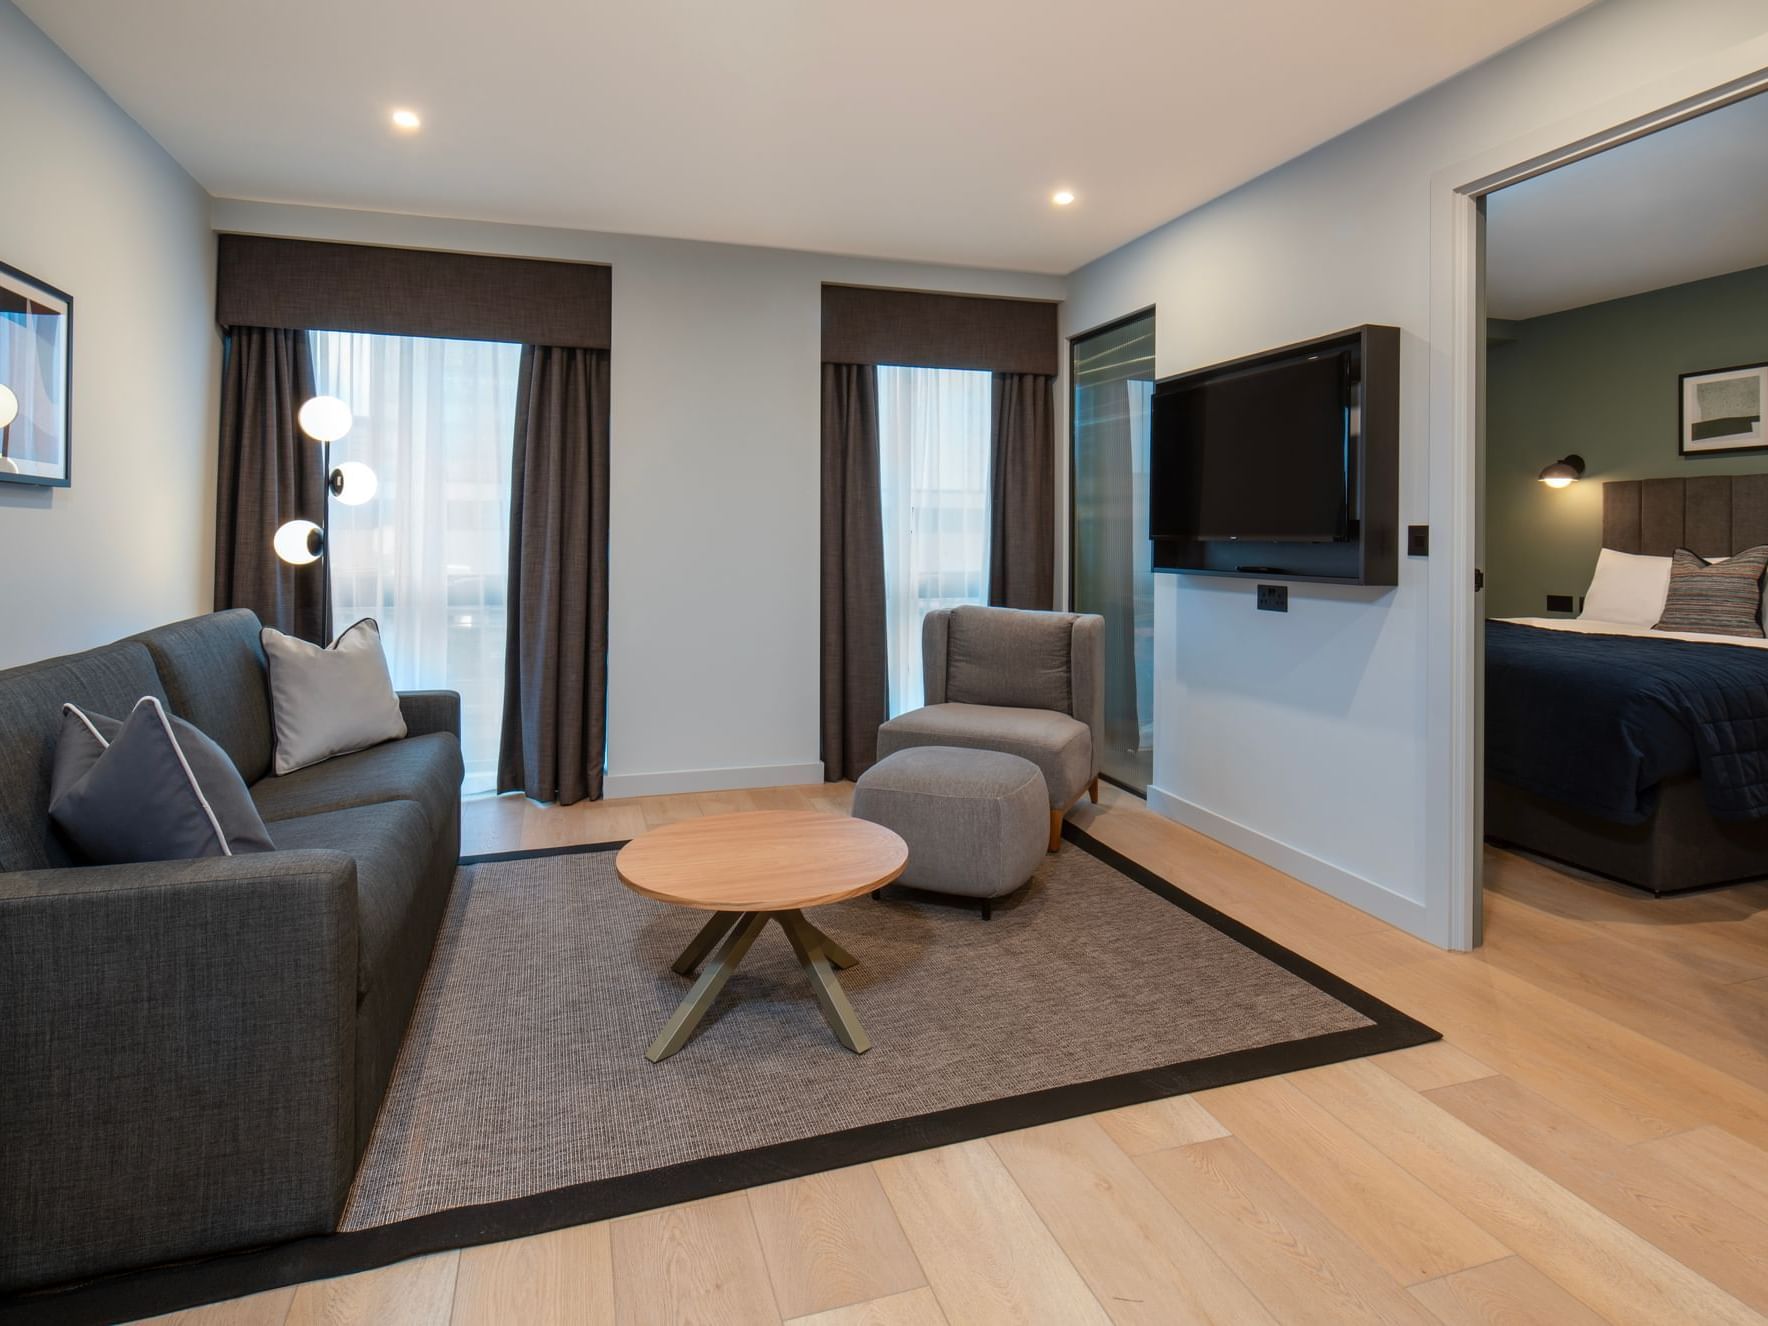  Lounge area with sofas and television with a door leading to the bedroom